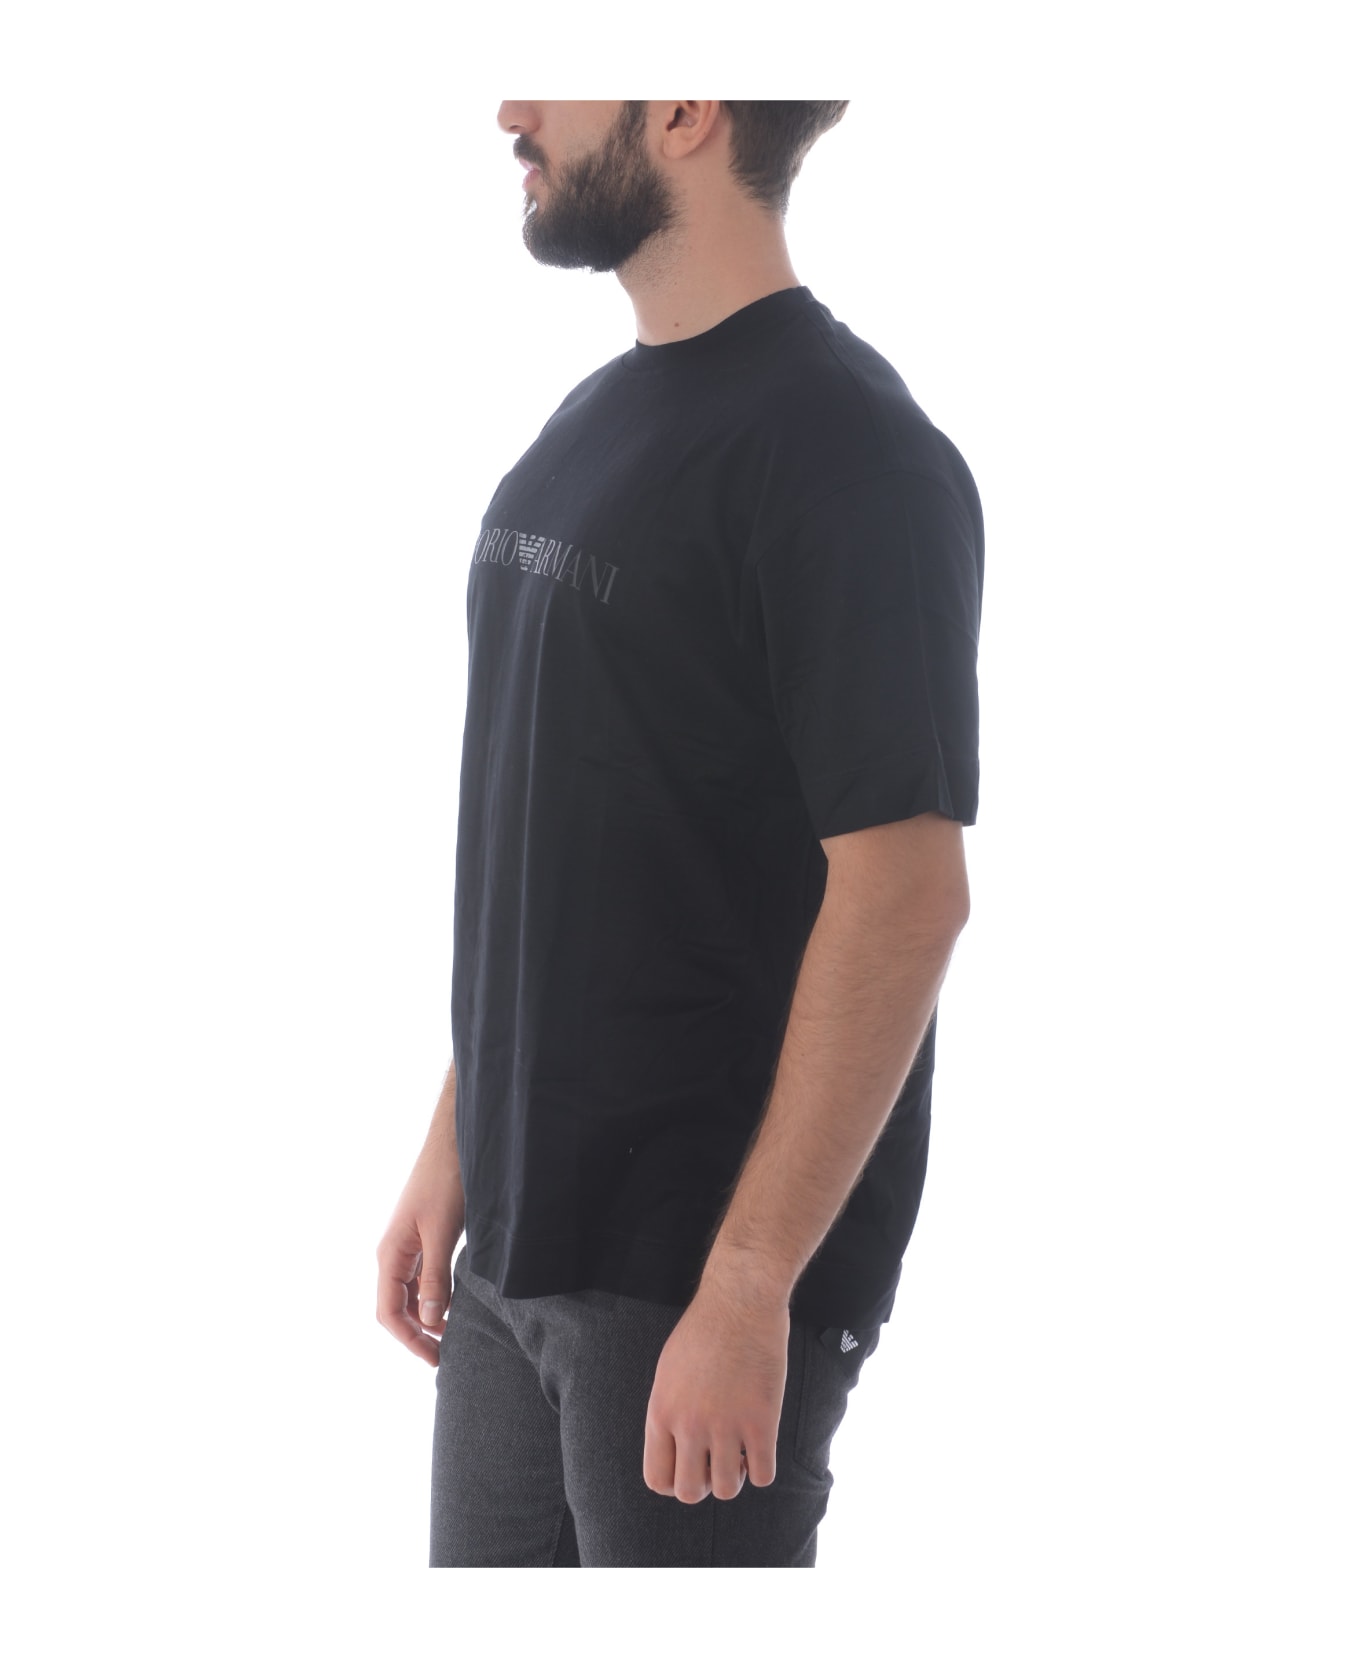 Emporio Armani T-shirt In Cotton And Lyocell Blend - Nero